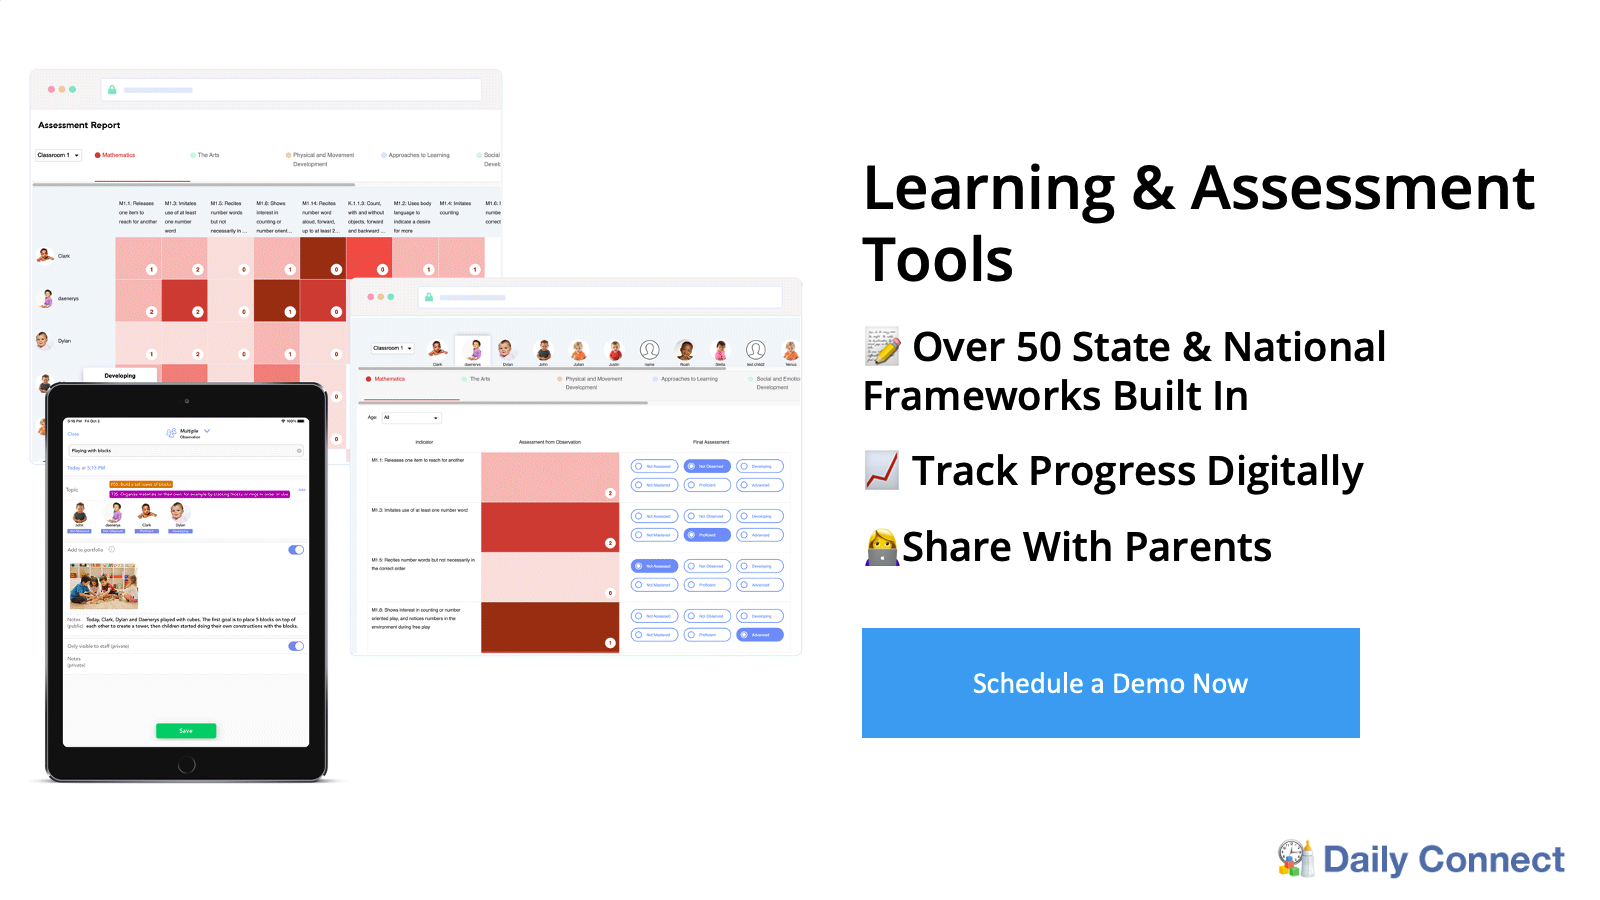 Built In Learning & Assessment Tools